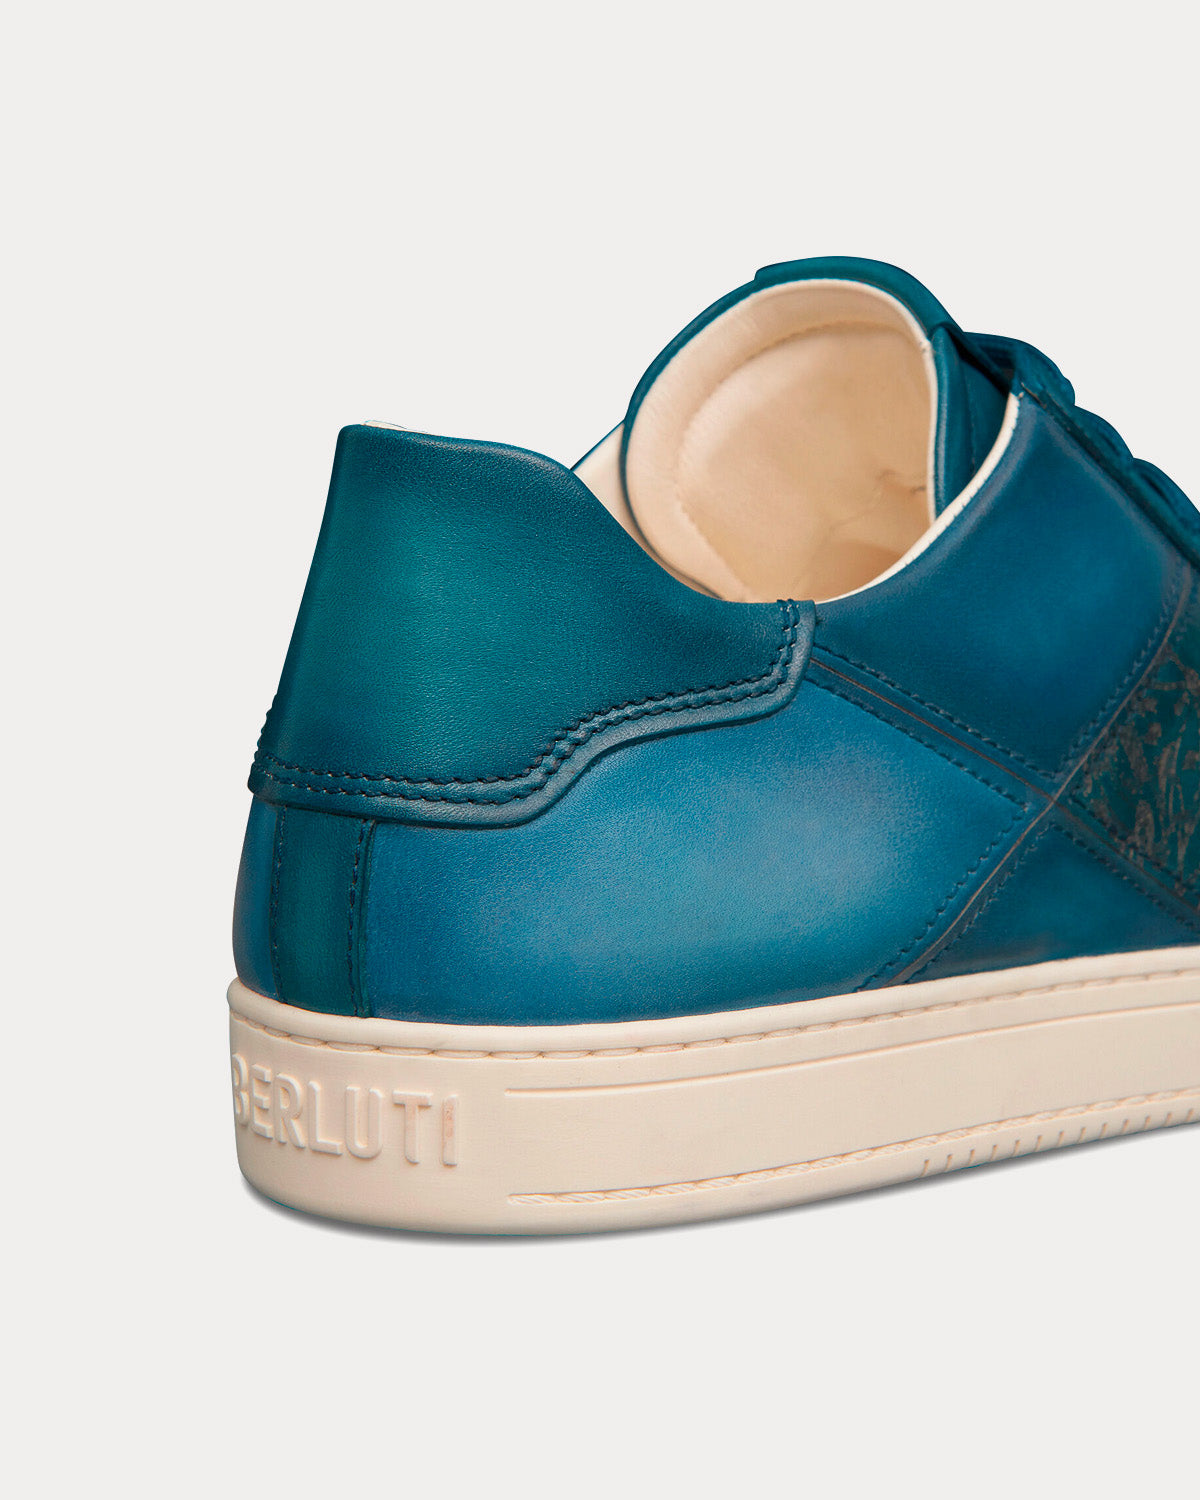 Berluti - Playtime Patchwork Scritto Leather Aveiro Low Top Sneakers